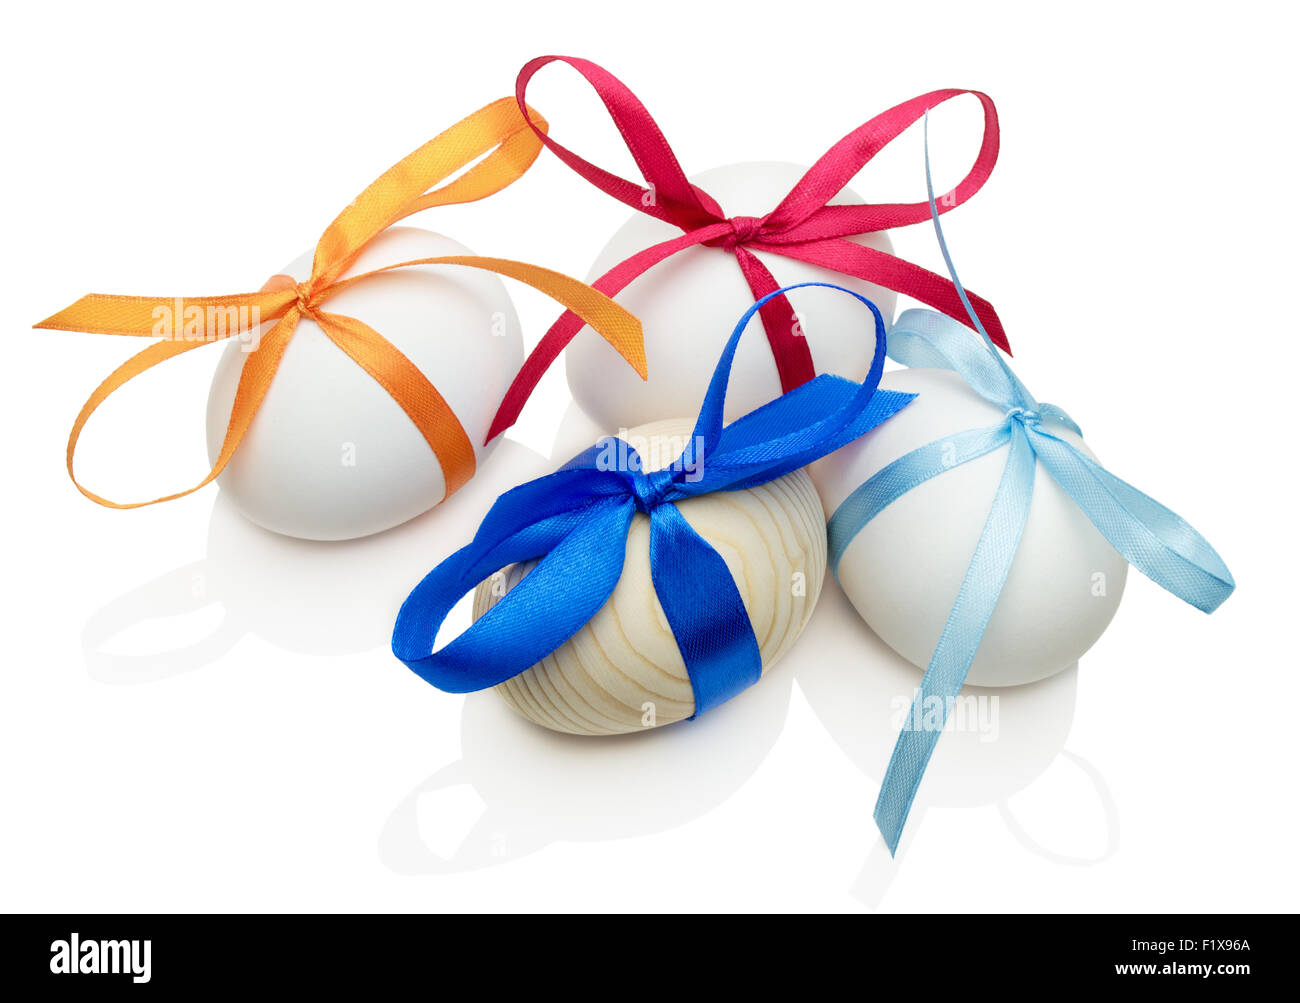 Easter eggs with bows isolated on white background. Stock Photo